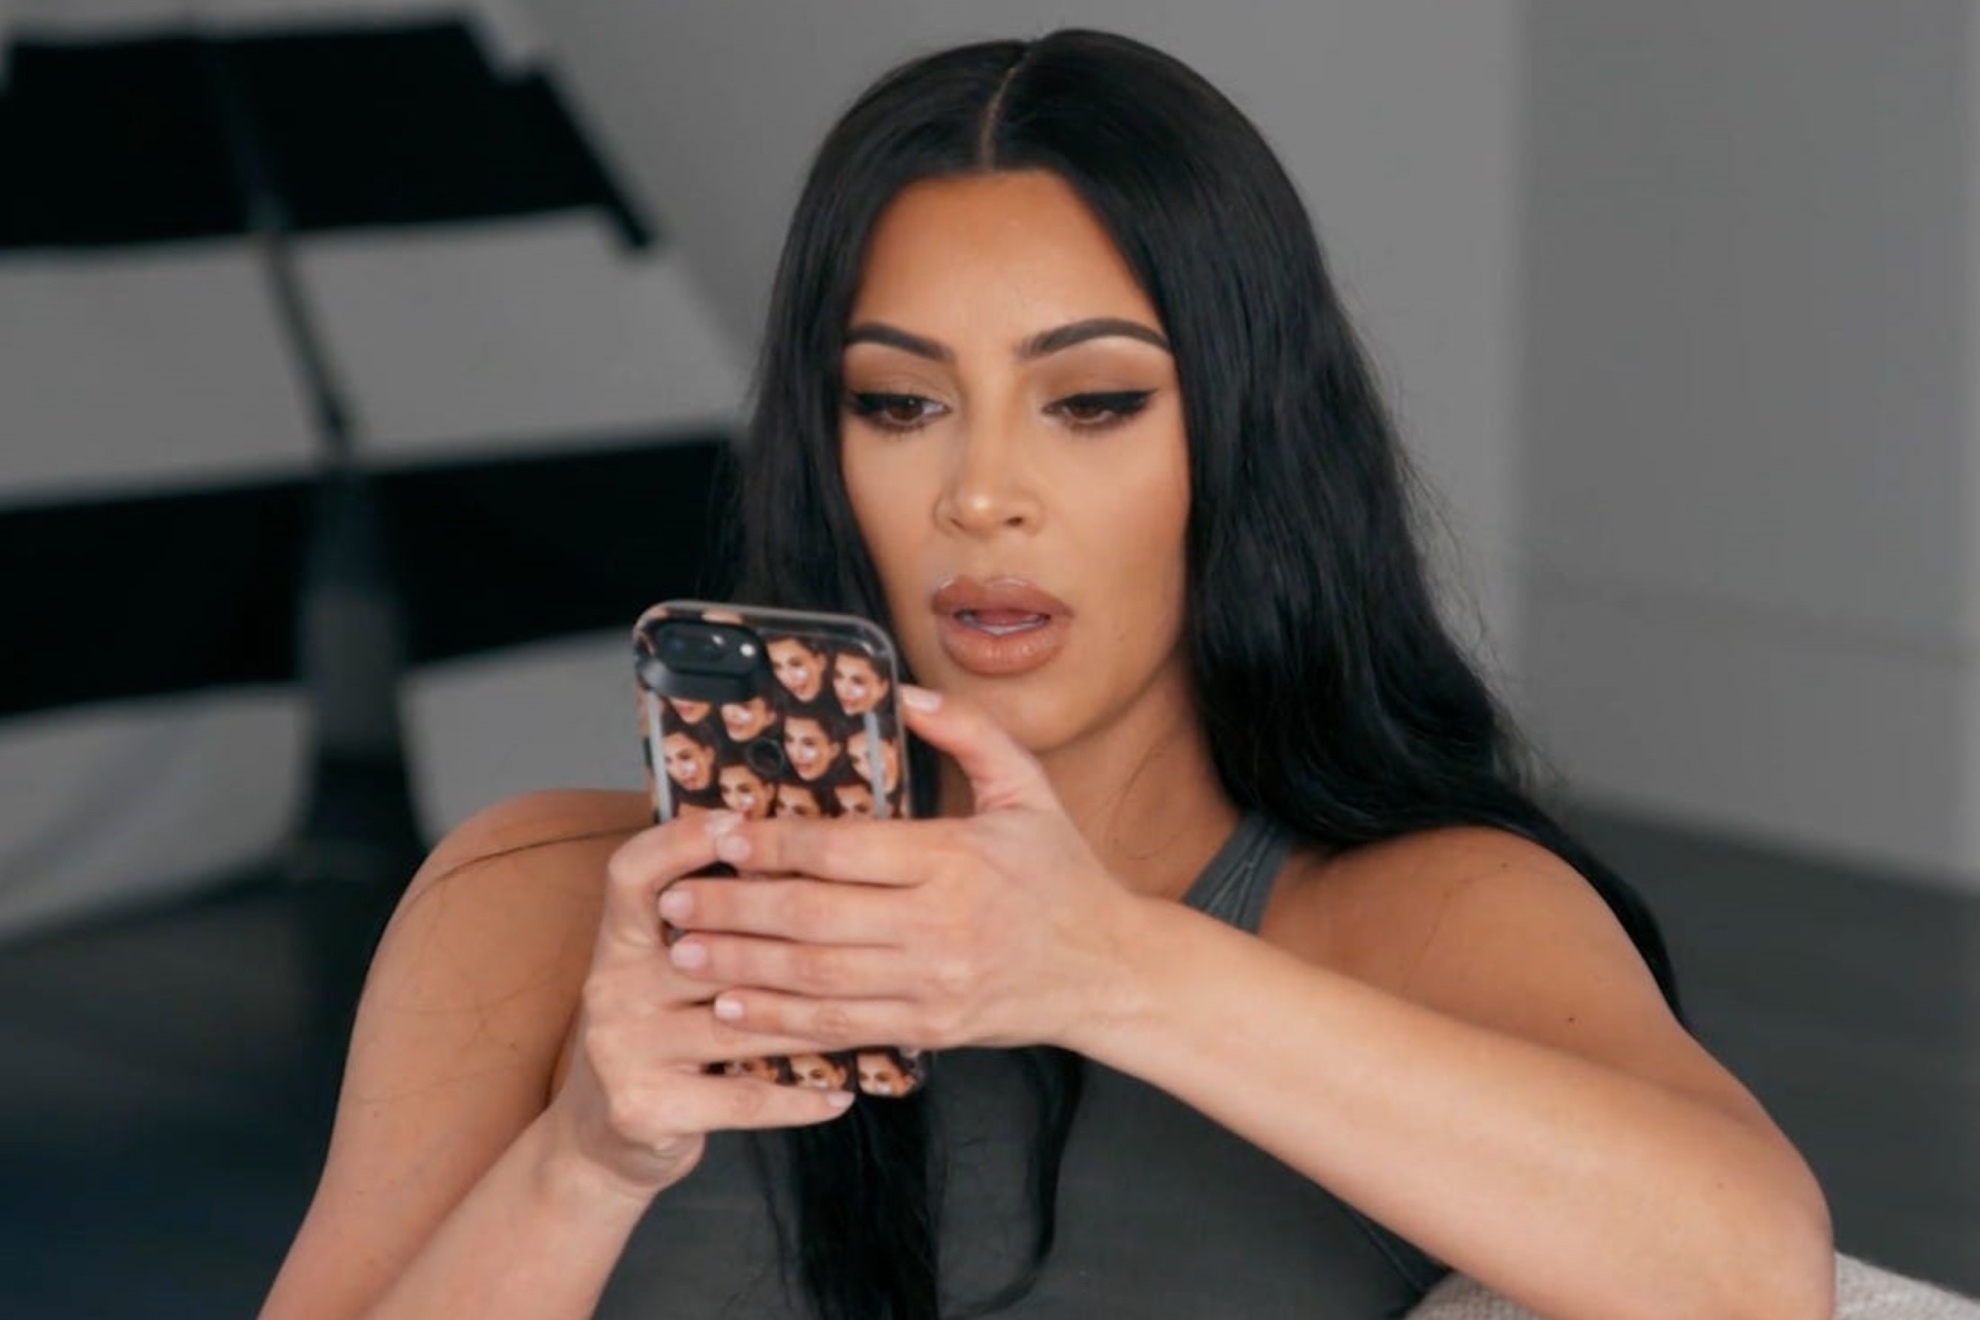 Absentee from Kardashian family iMessage group sends social media into meltdown